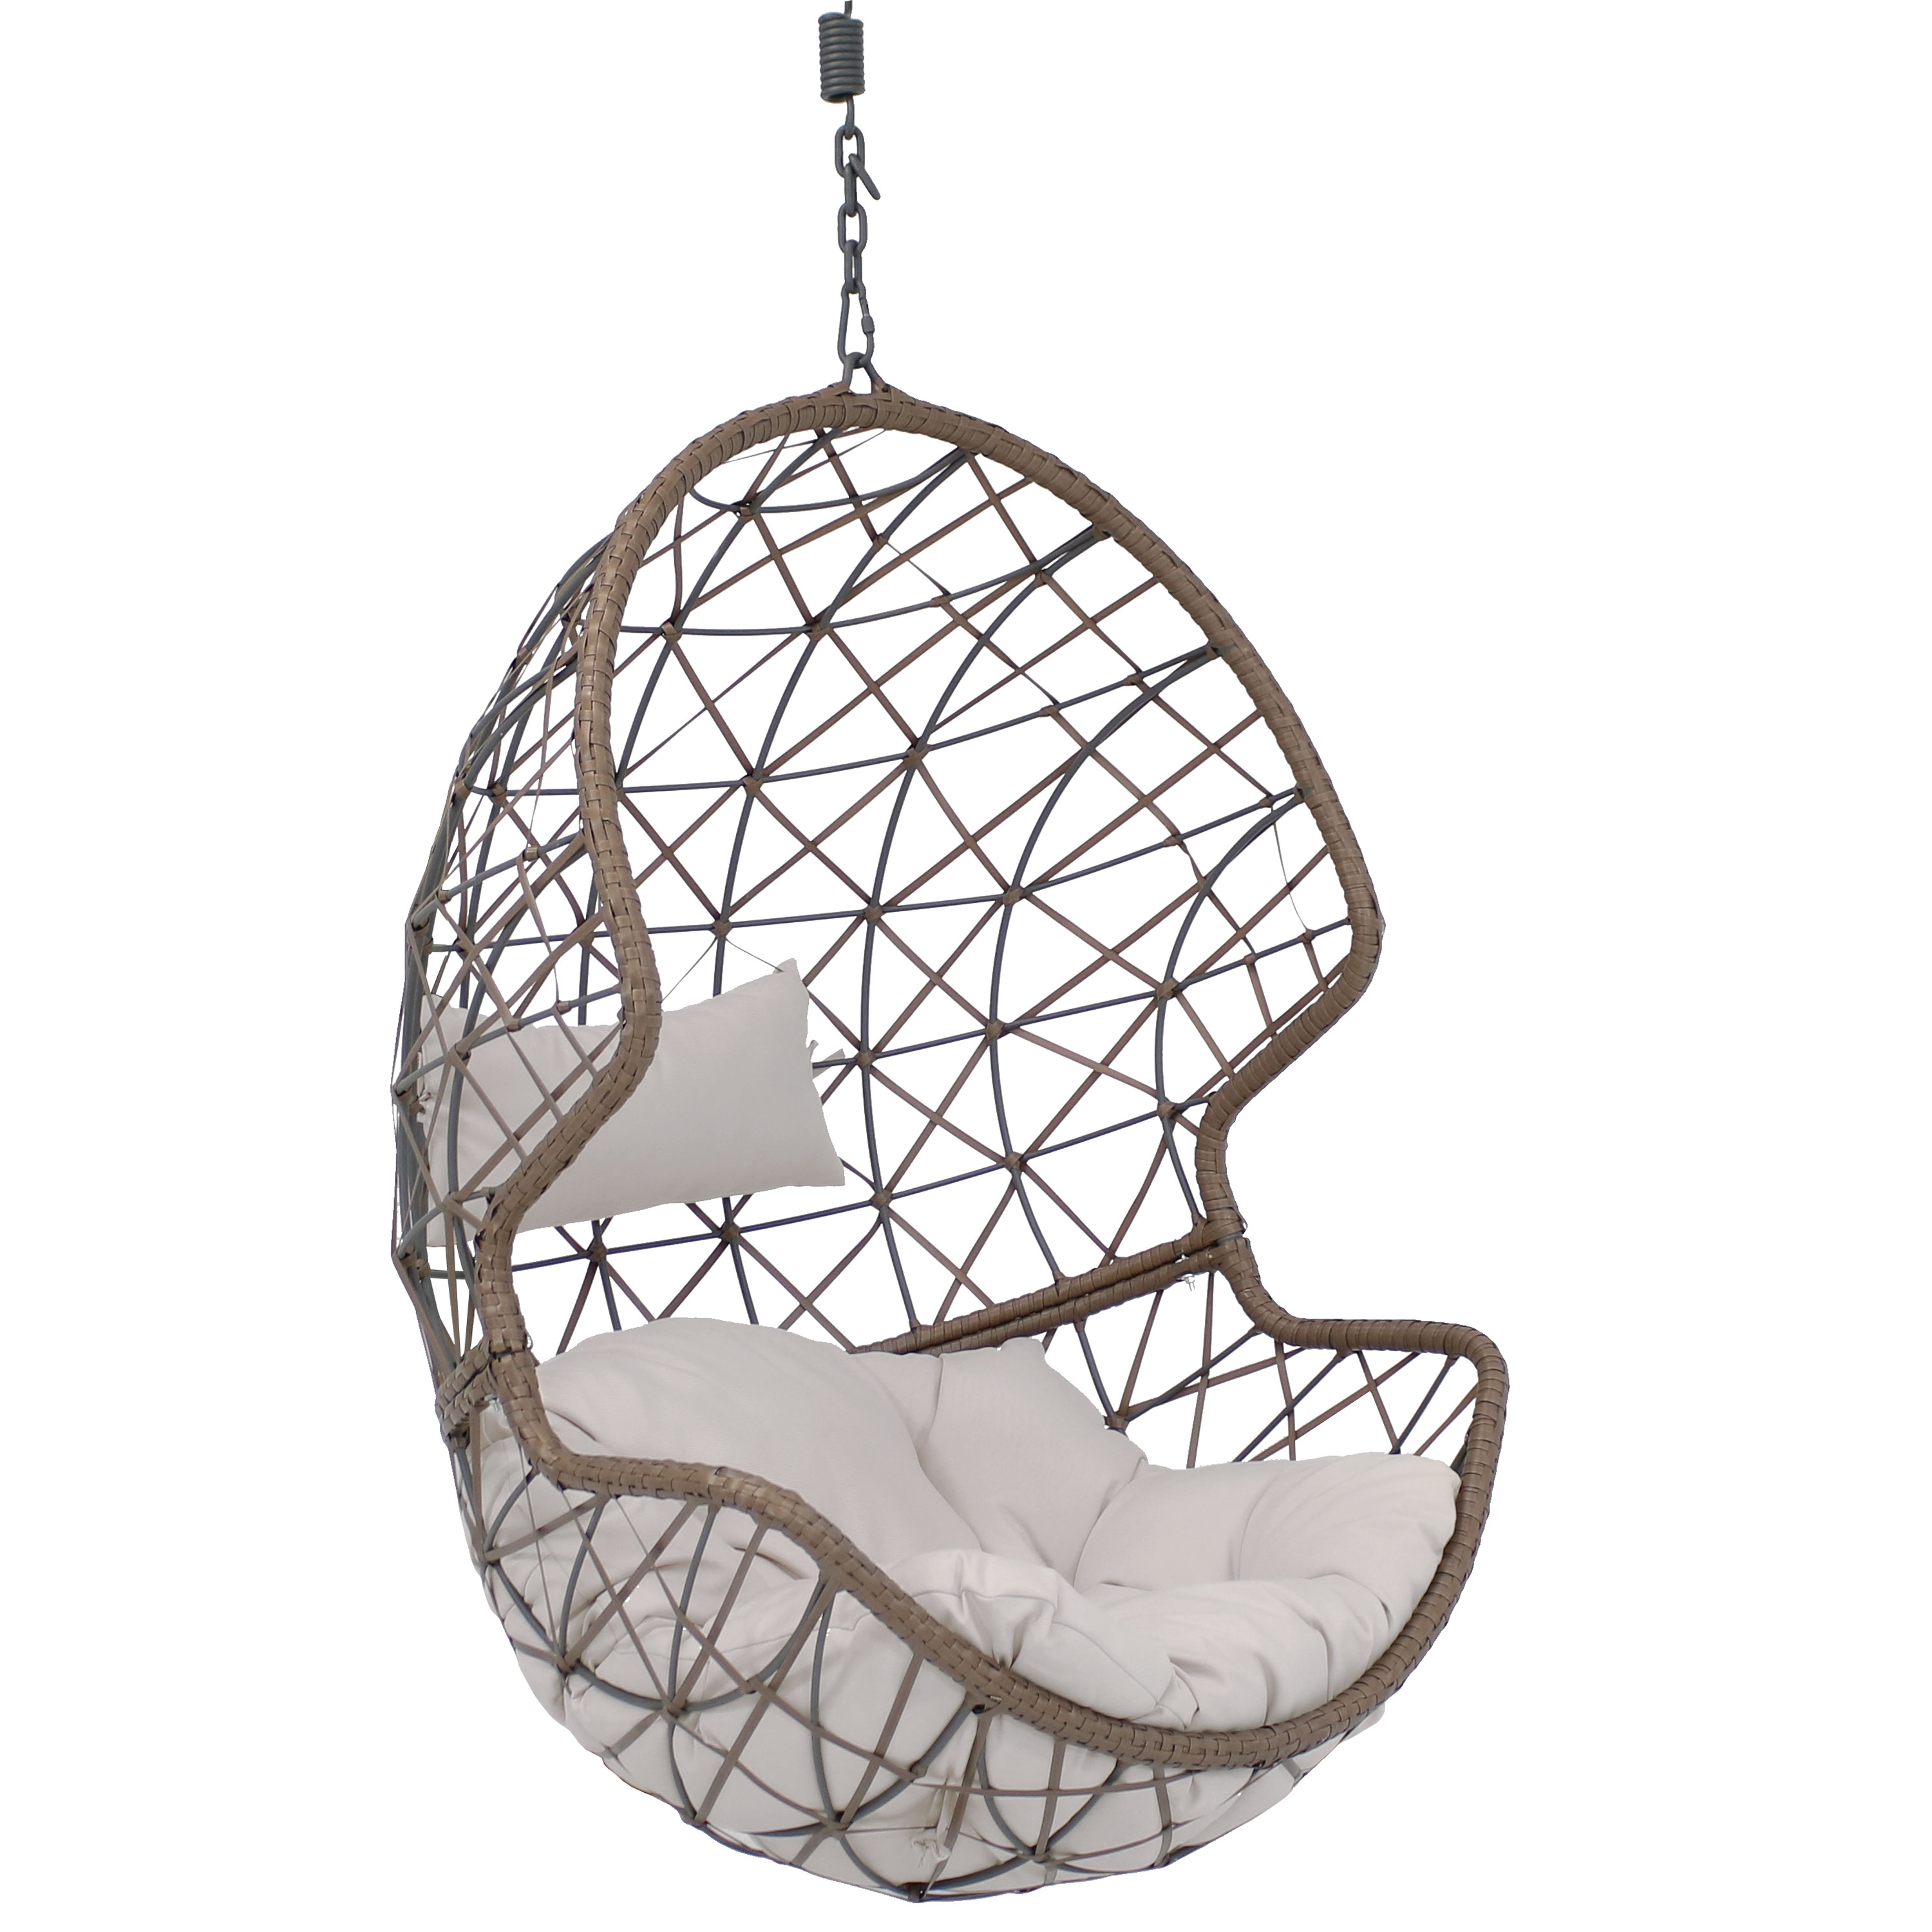 Sunnydaze Danielle Hanging Egg Chair, Resin Wicker Basket Design, Outdoor Use, Includes Cushion, Gray